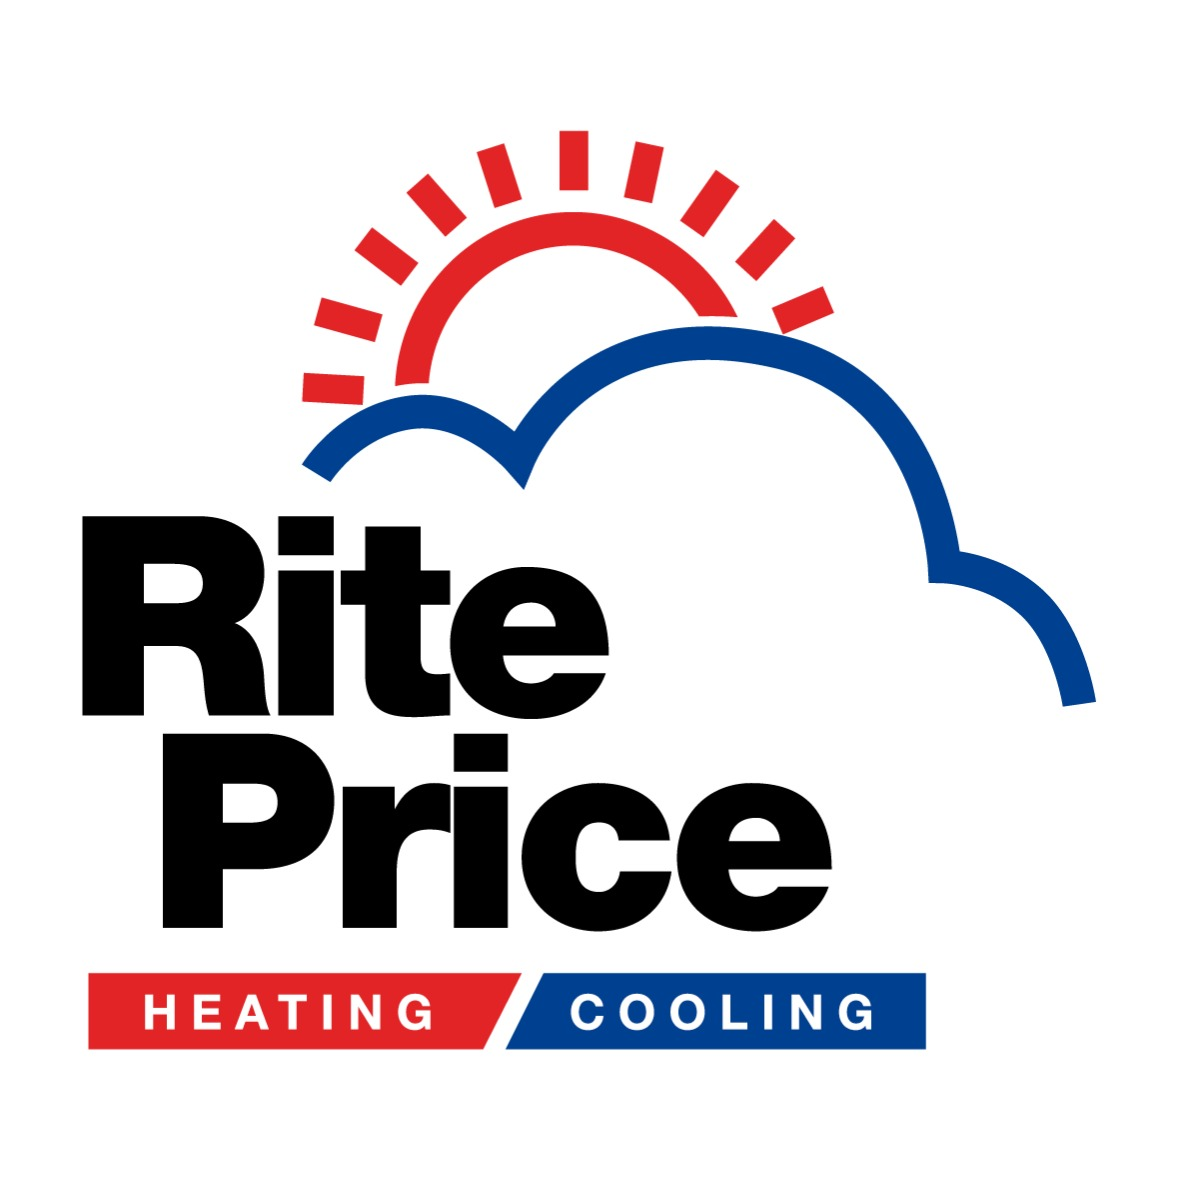 Rite Price Heating & Cooling Adelaide - Evandale, SA 5069 - (08) 8261 2277 | ShowMeLocal.com